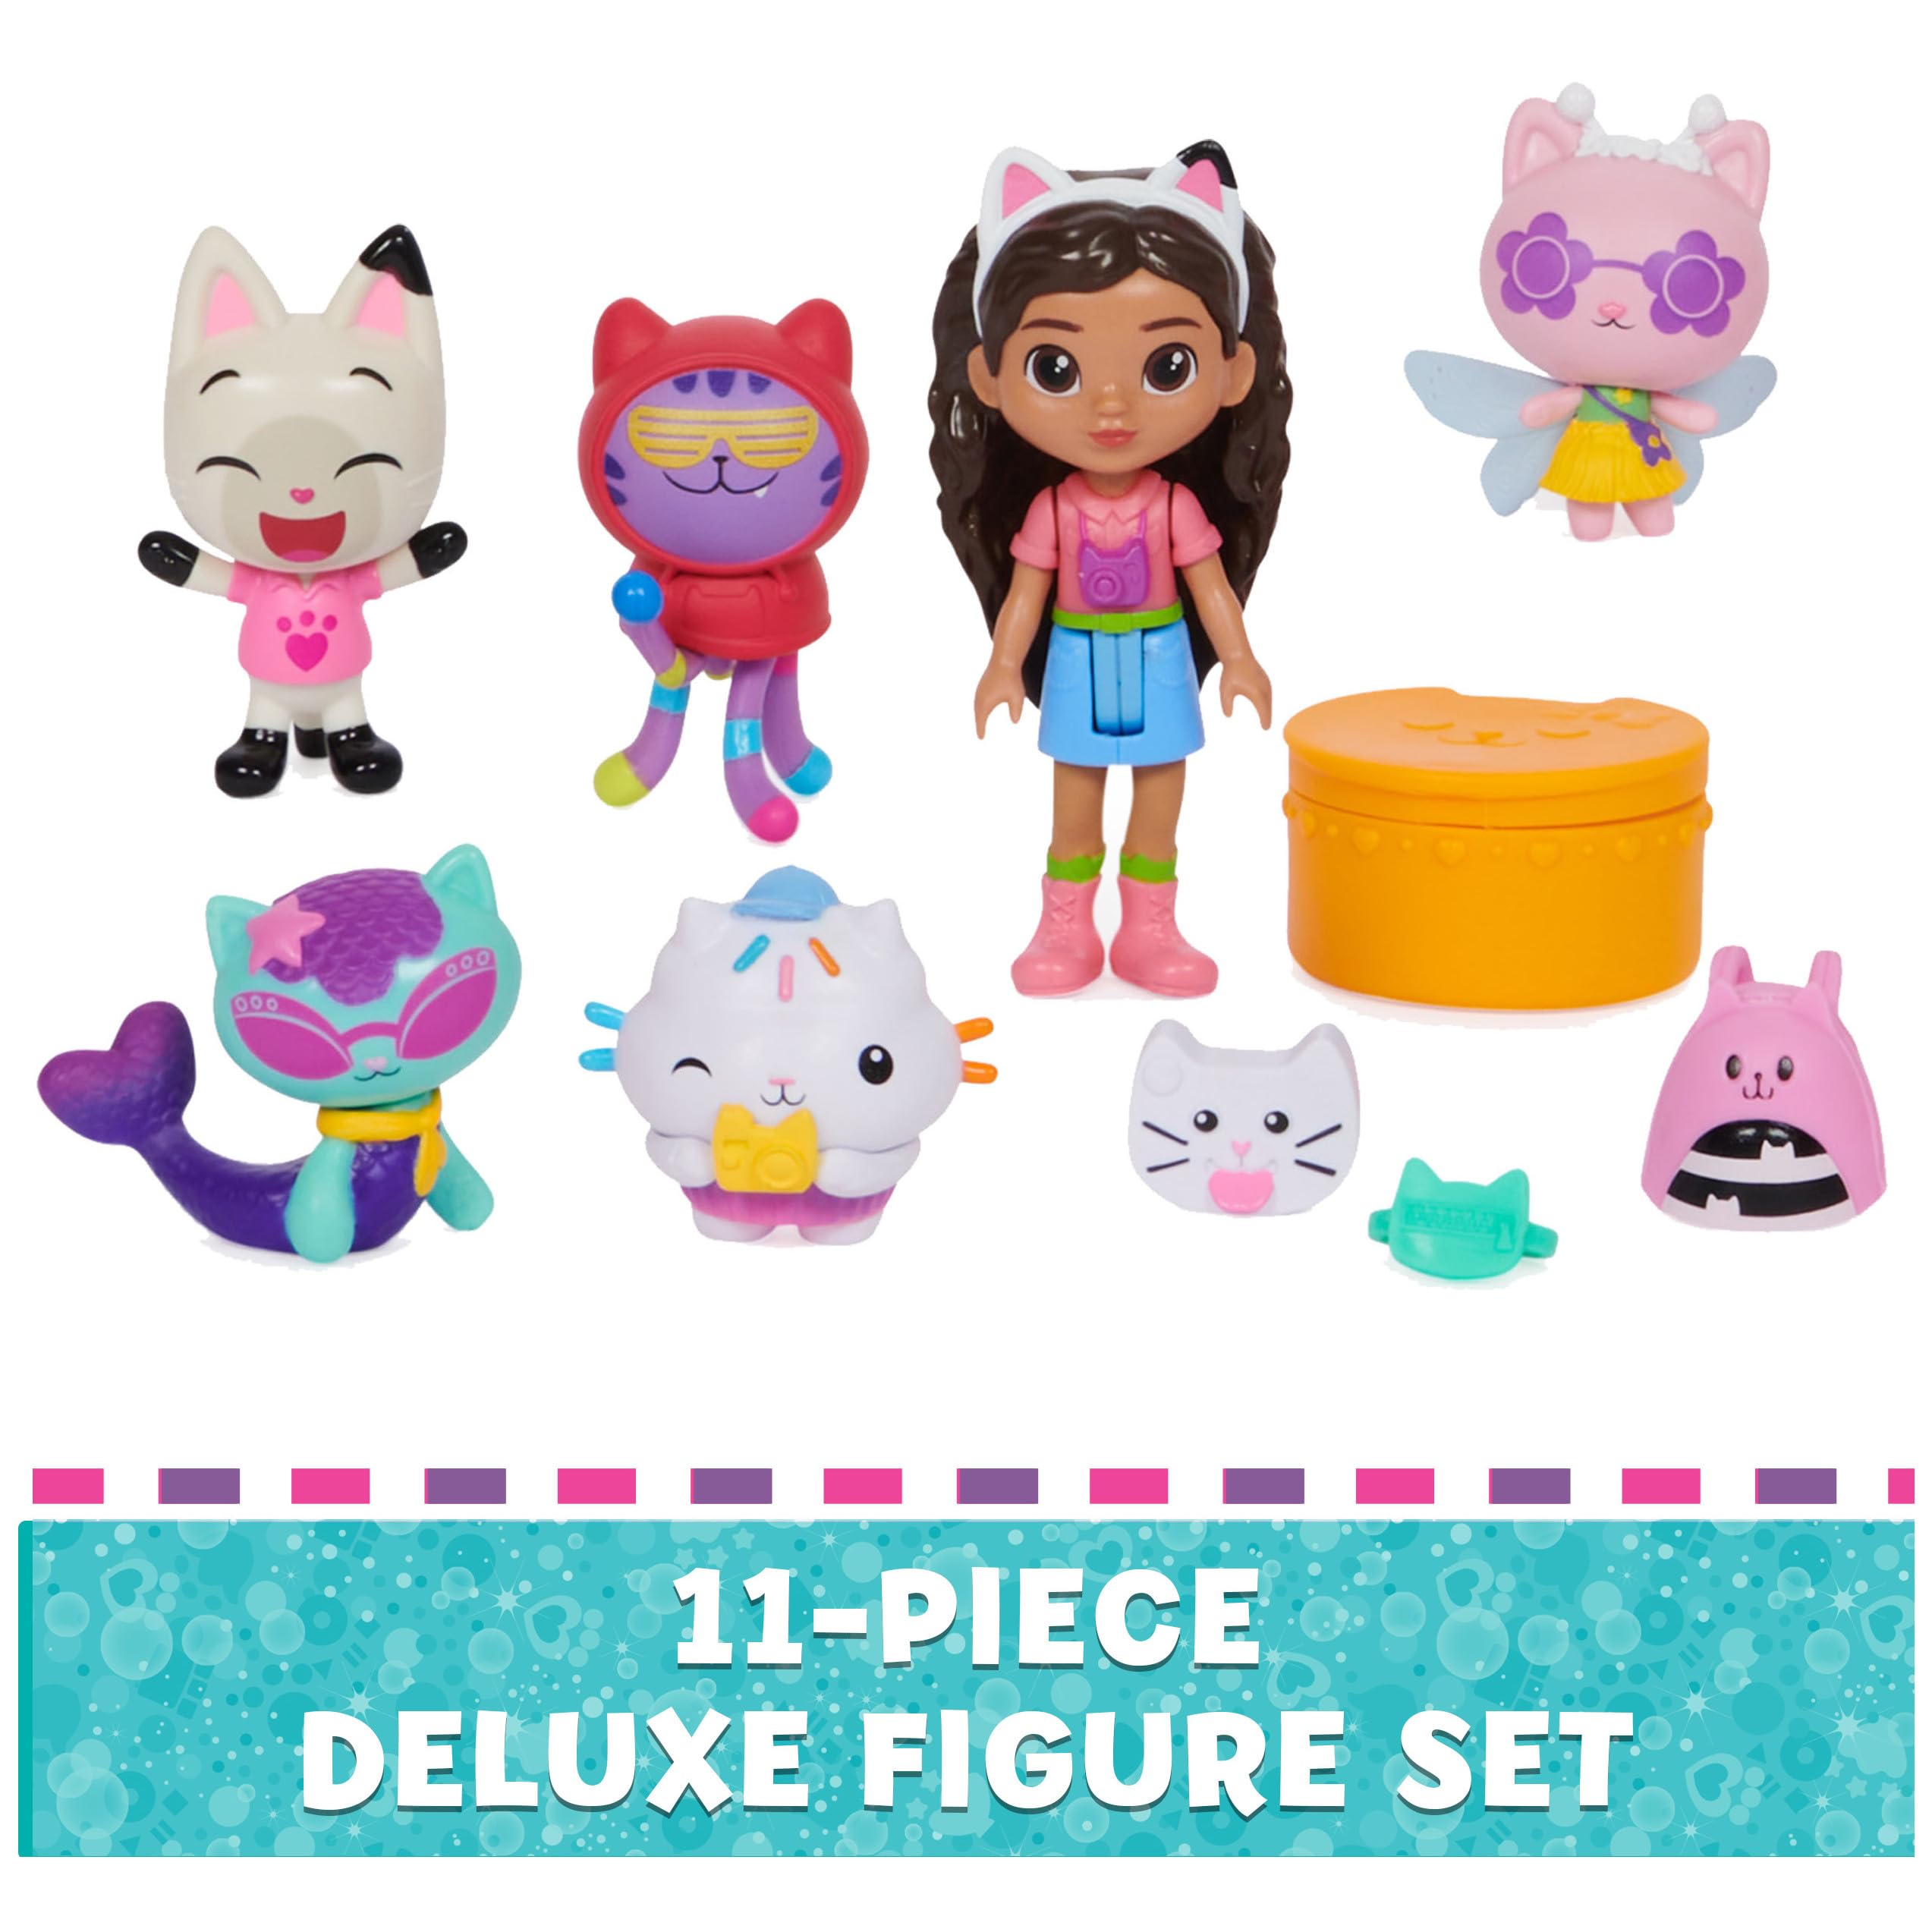 Gabby's Dollhouse, Travel Themed Figure Set with a Gabby Doll, 5 Cat Toy Figures, Surprise Toys & Dollhouse Accessories, Kids Toys for Girls & Boys 3+